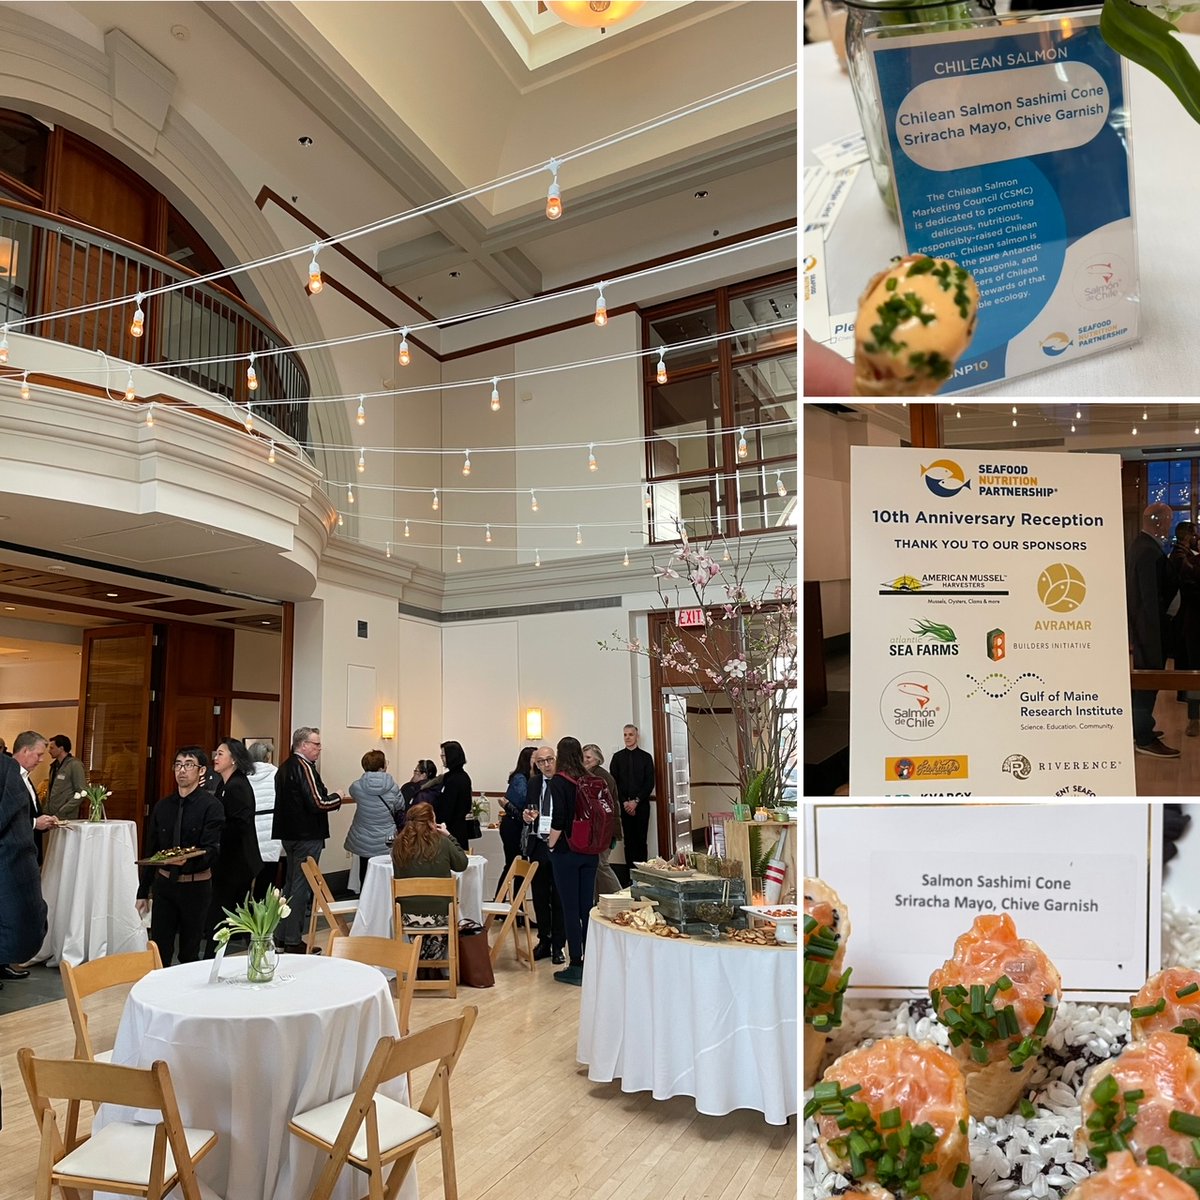 Great celebration last night in honor of Seafood Nutrition Partnership's 10th anniversary at the Boston Fish Pier. Here's to 10 more, SNP!

#Seafood2xWk #Omega3s #EatSeafoodAmerica #chileansalmon #salmondechile #salmon #healthy #nutritious #delicious #healthyfood